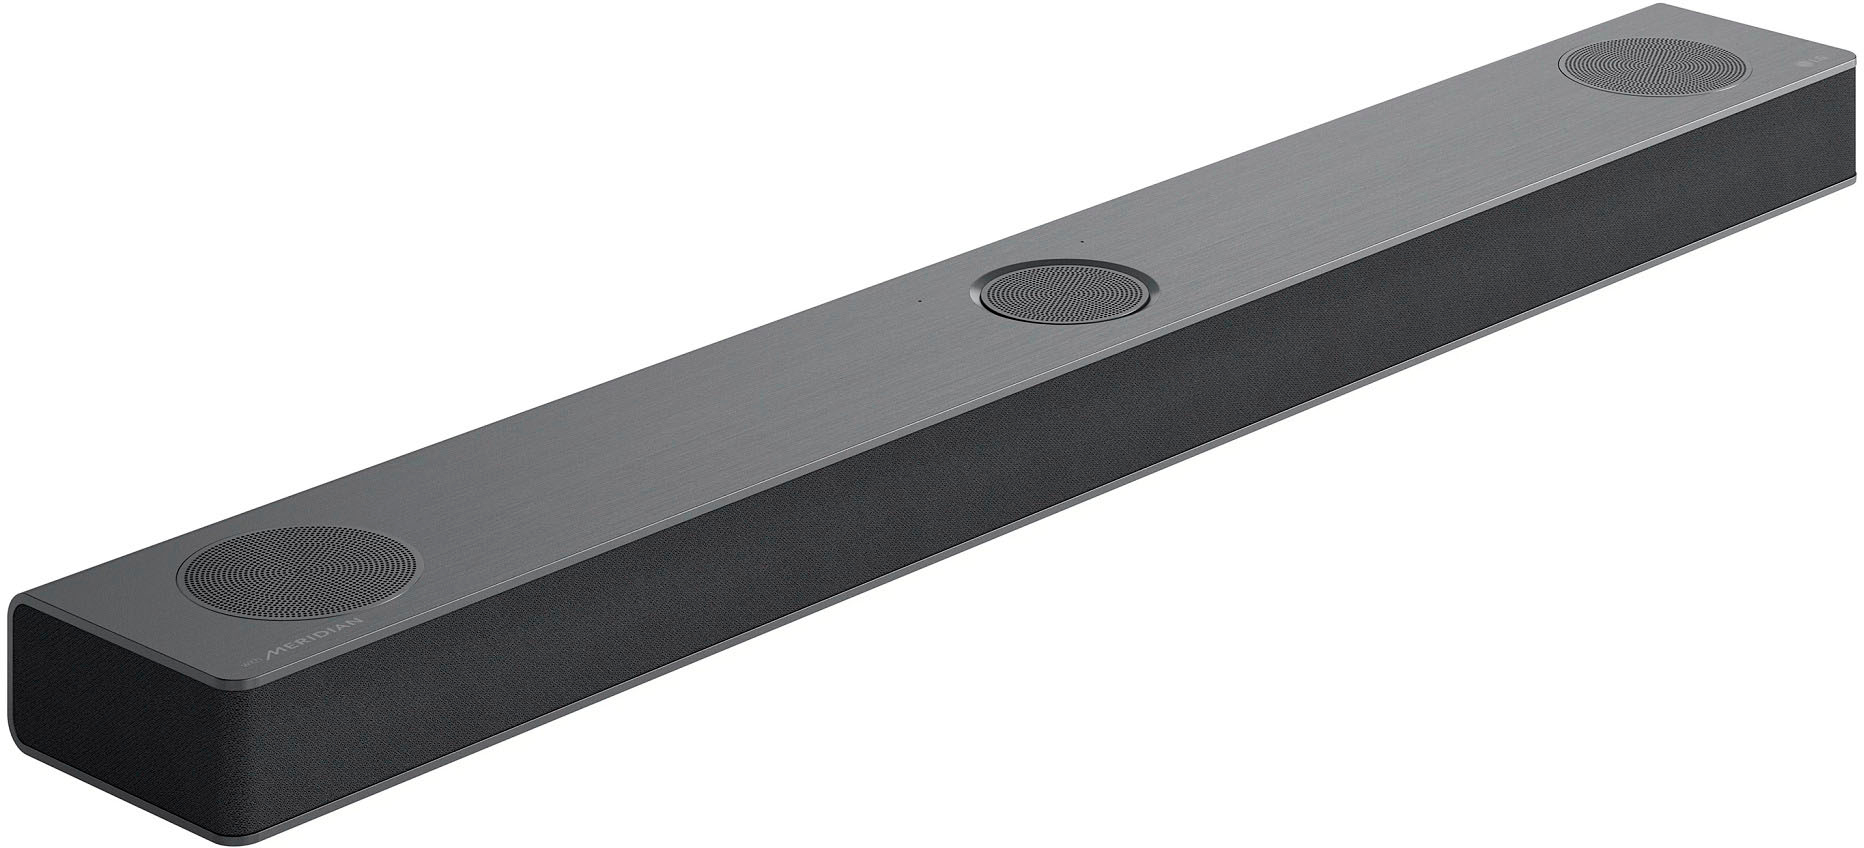 LG 3.1.3 Channel Soundbar DTS:X - Dolby Wireless Subwoofer, Buy and with Atmos Best S80QY Black